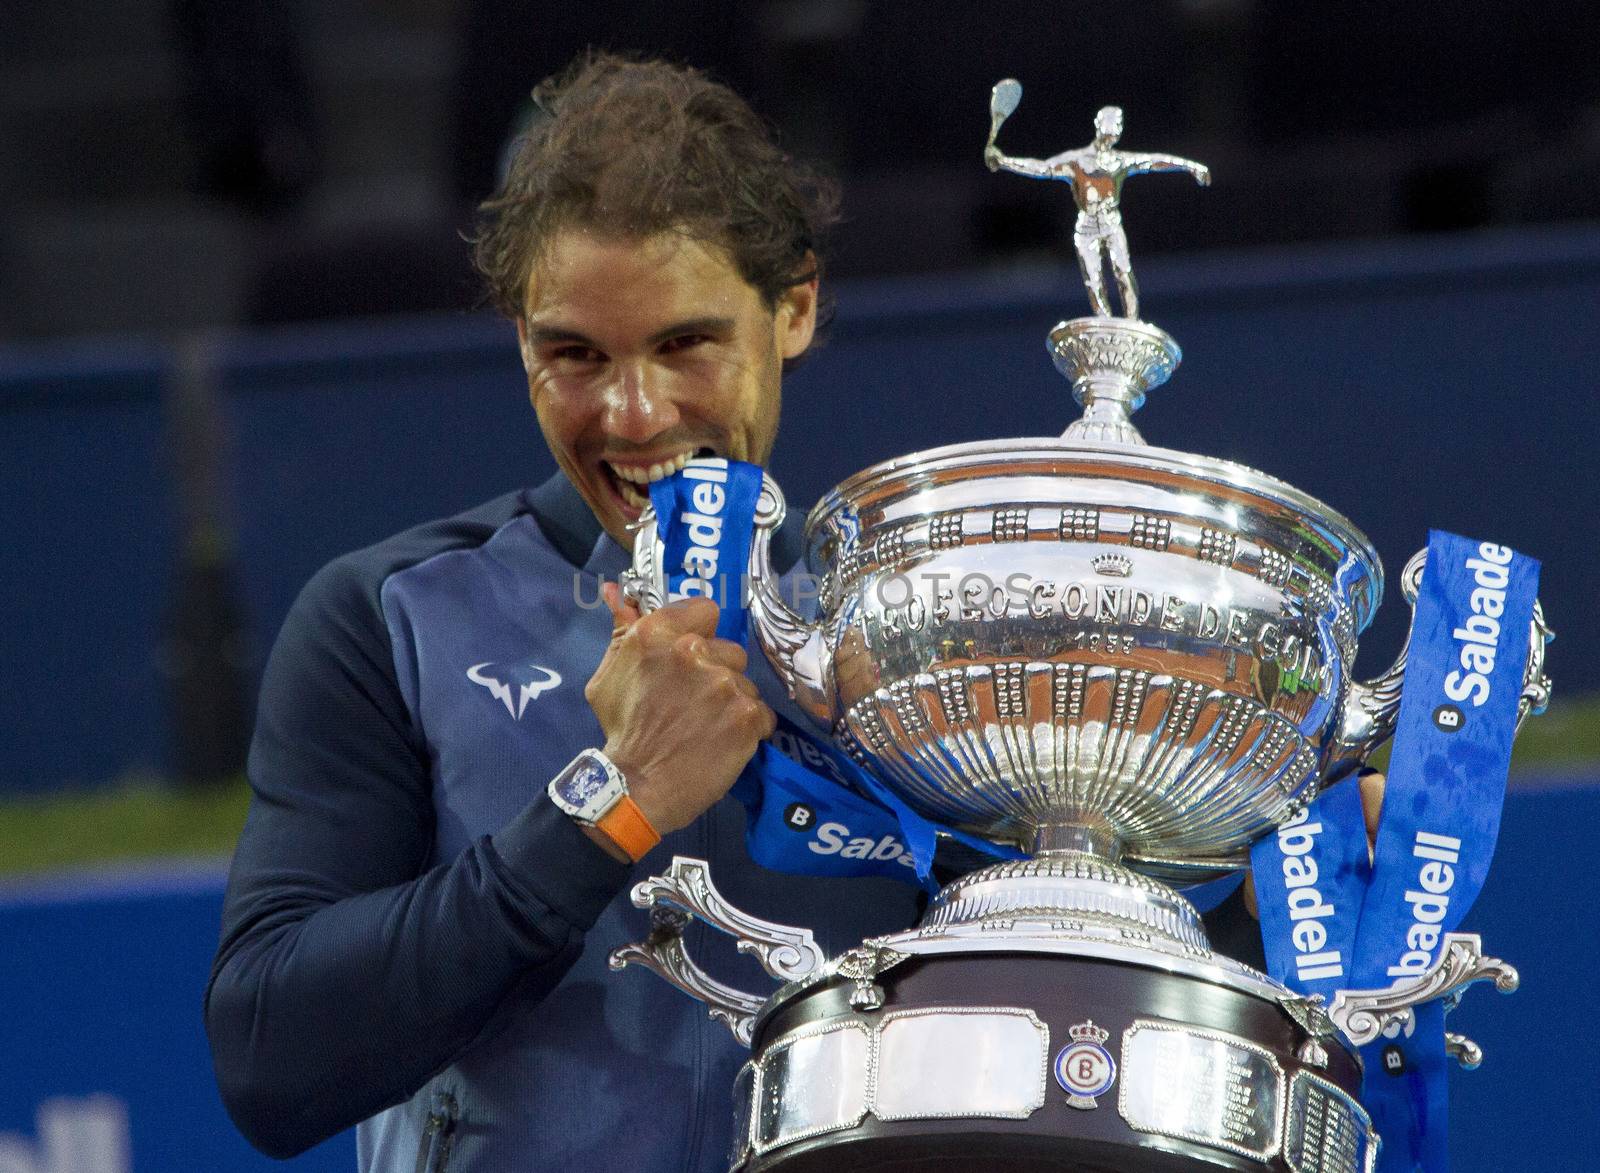 SPAIN, Barcelona: Spanish tennis player Rafael Nadal celebrates defeating Japanese tennis player Kei Nishikori during the final of the ATP Barcelona Open Conde de Godo tennis tournament in Barcelona on April 24, 2015. Rafael Nadal equalled Argentine legend Guillermo Vilas's record of 49 clay-court titles with his ninth Barcelona Open after overcoming defending champion Kei Nishikori 6-4, 7-5 today. 